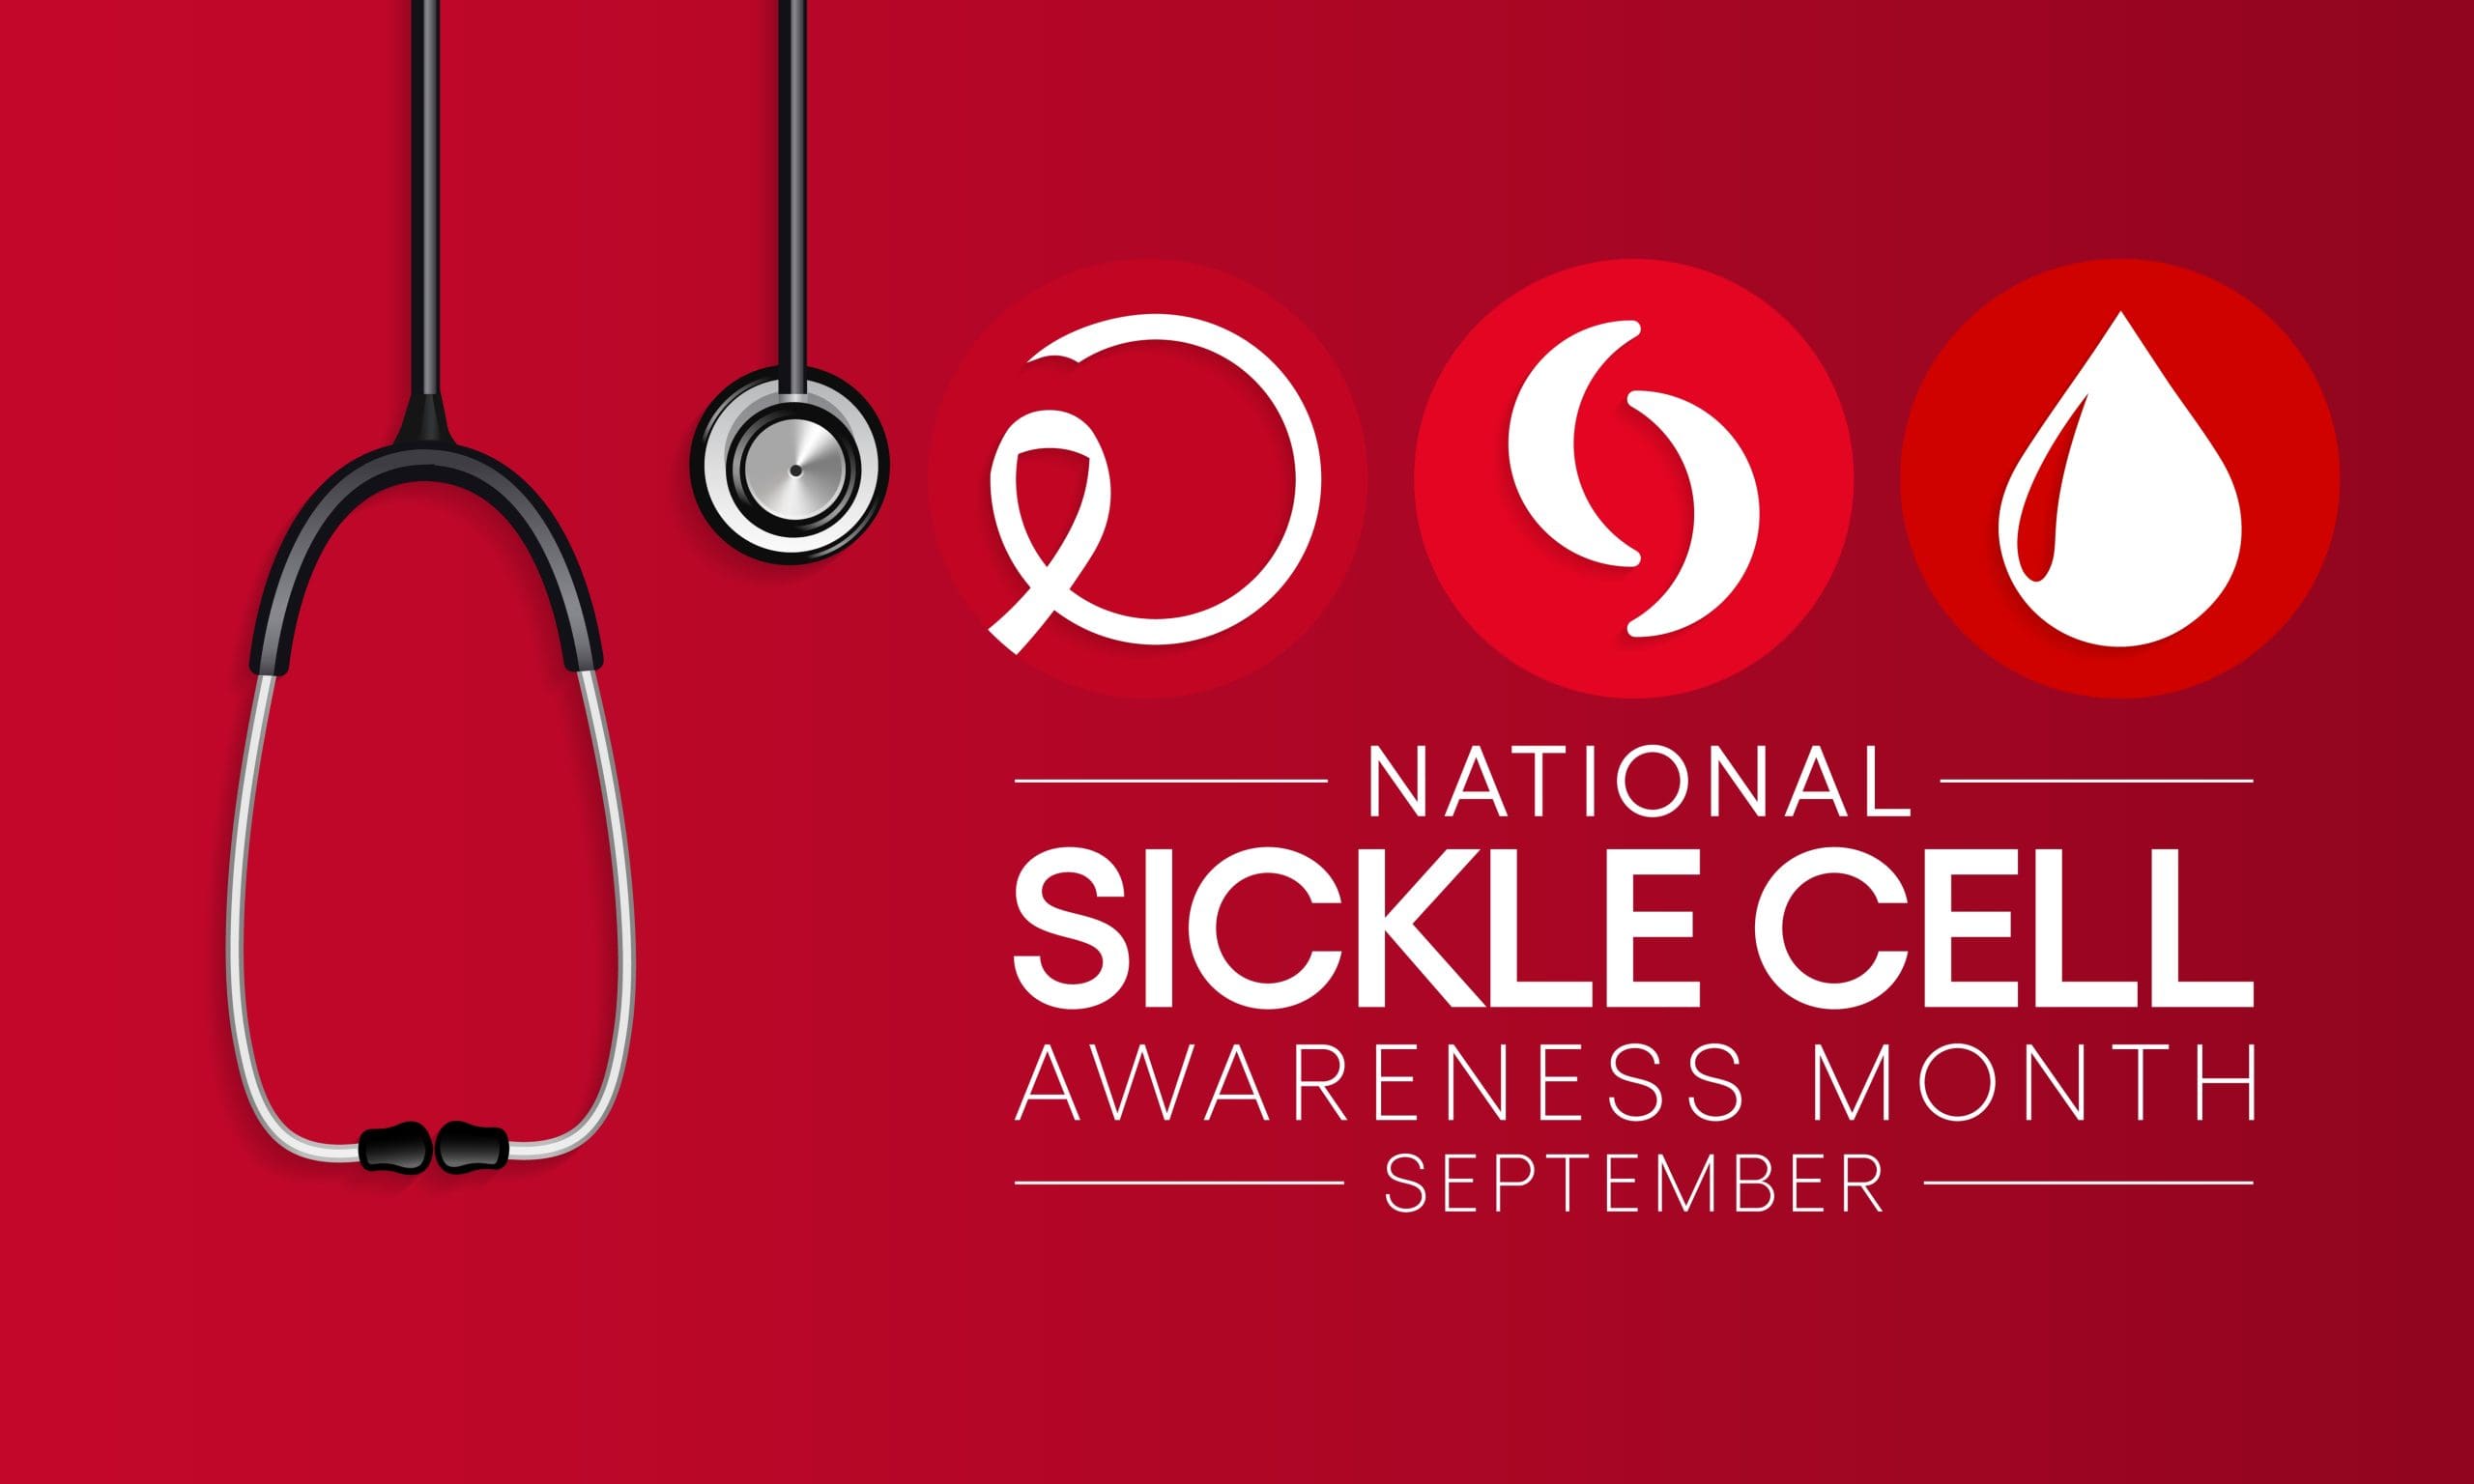 Sickle Cell Disease and ICU